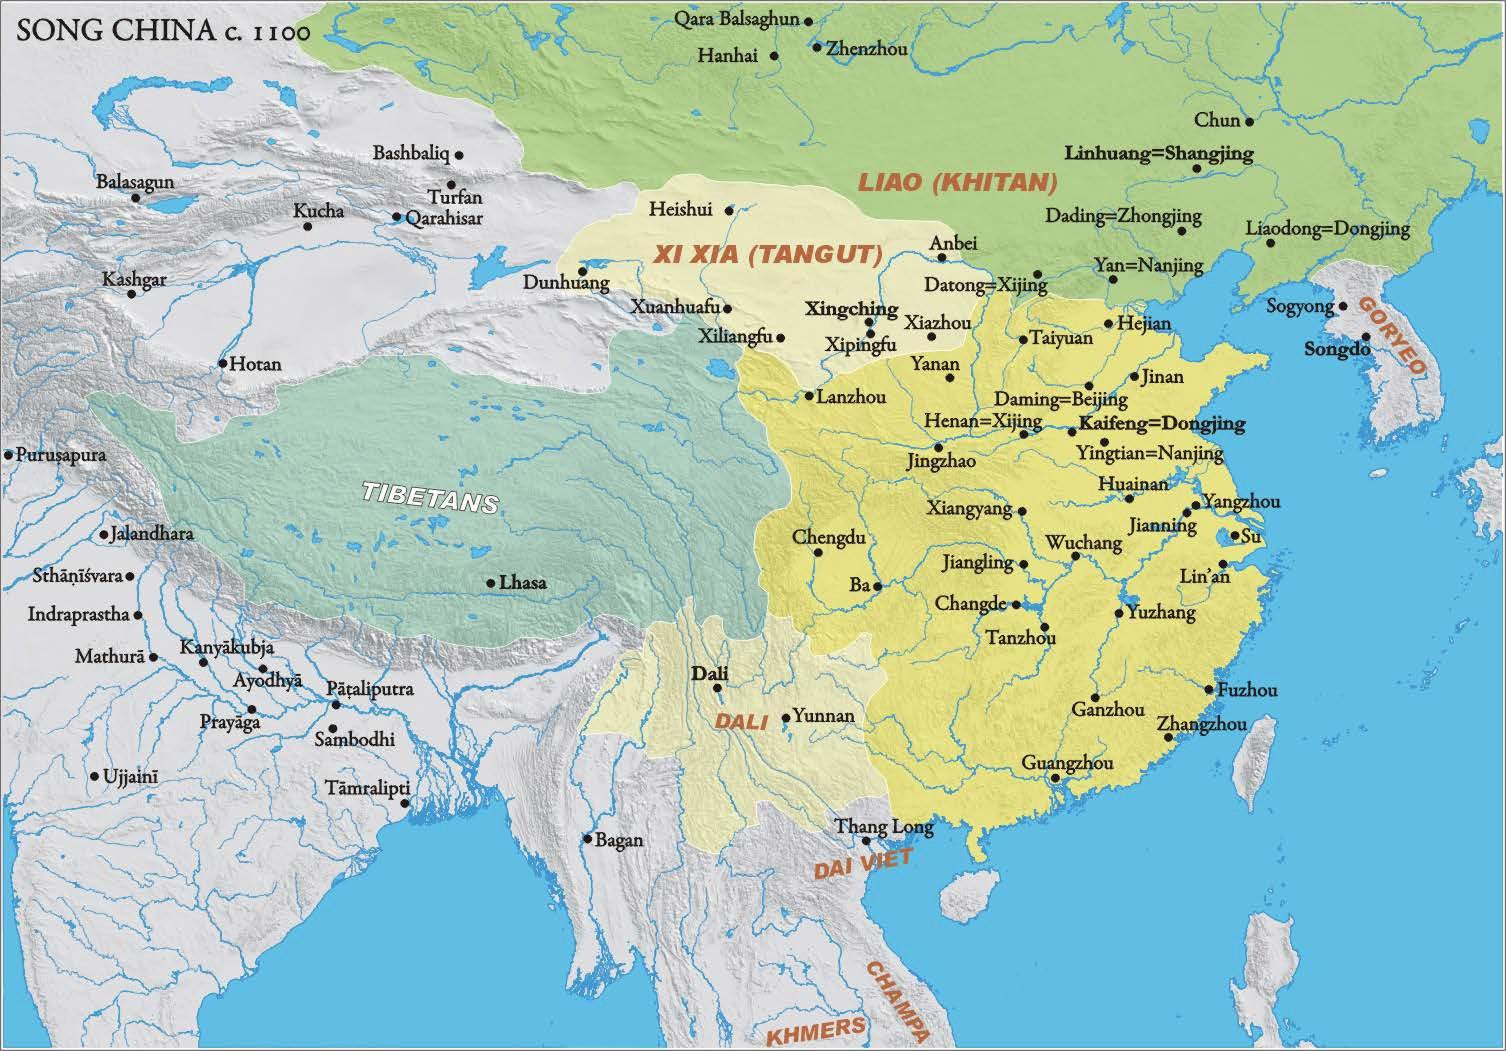 Map of The Northern Song Dynasty in 1100 CE